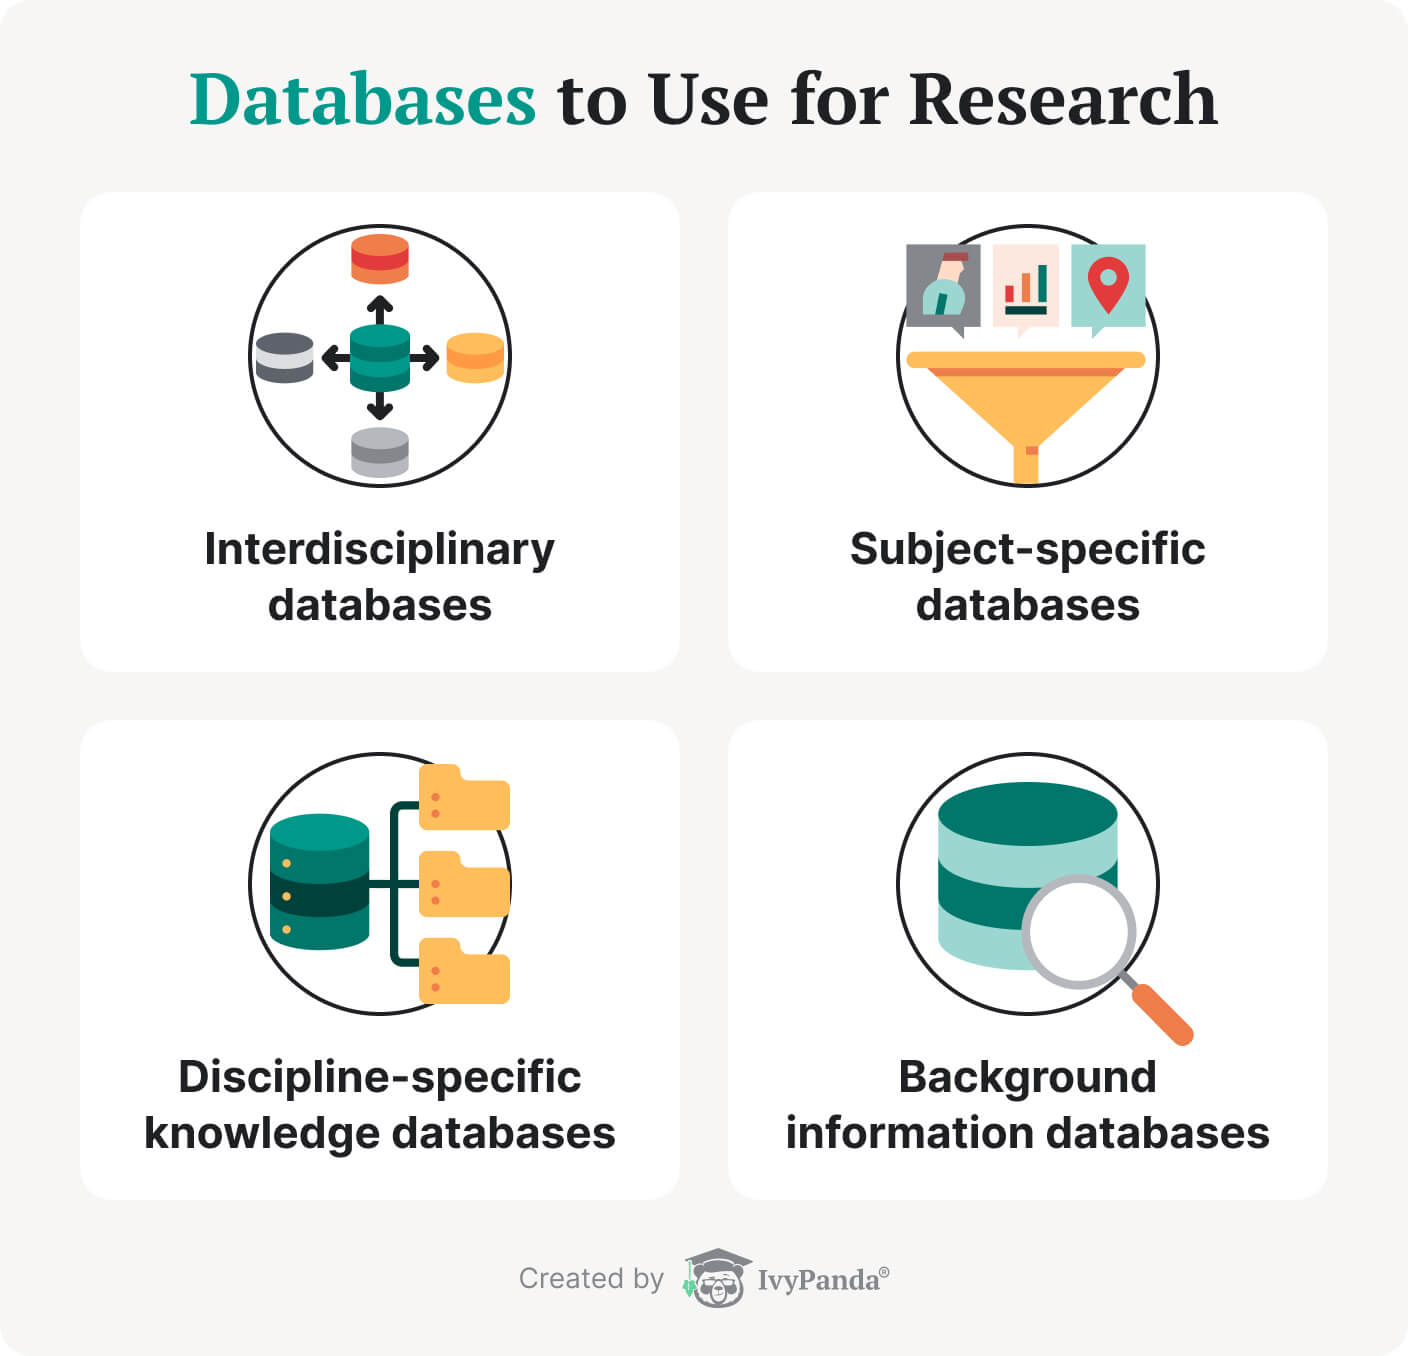 Types of databases for research.